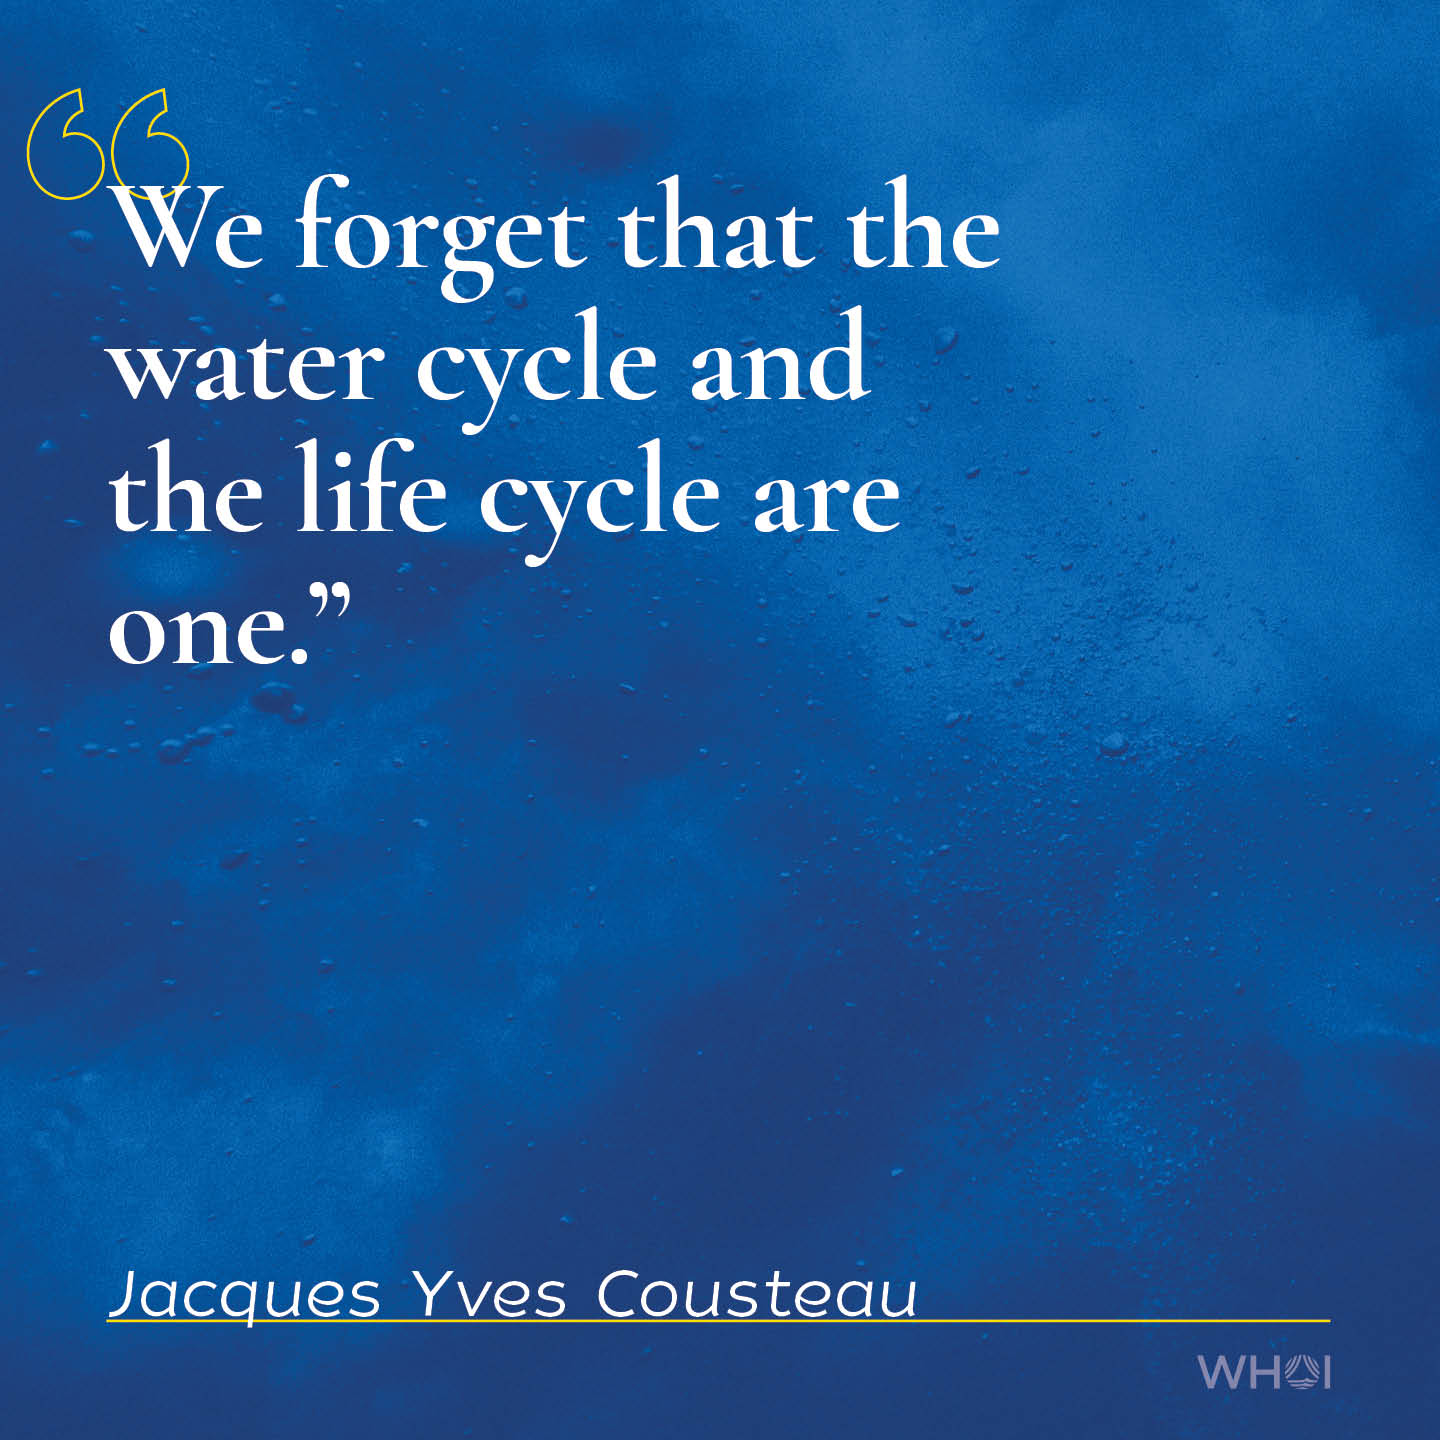 Jacques Yves Cousteau Quote